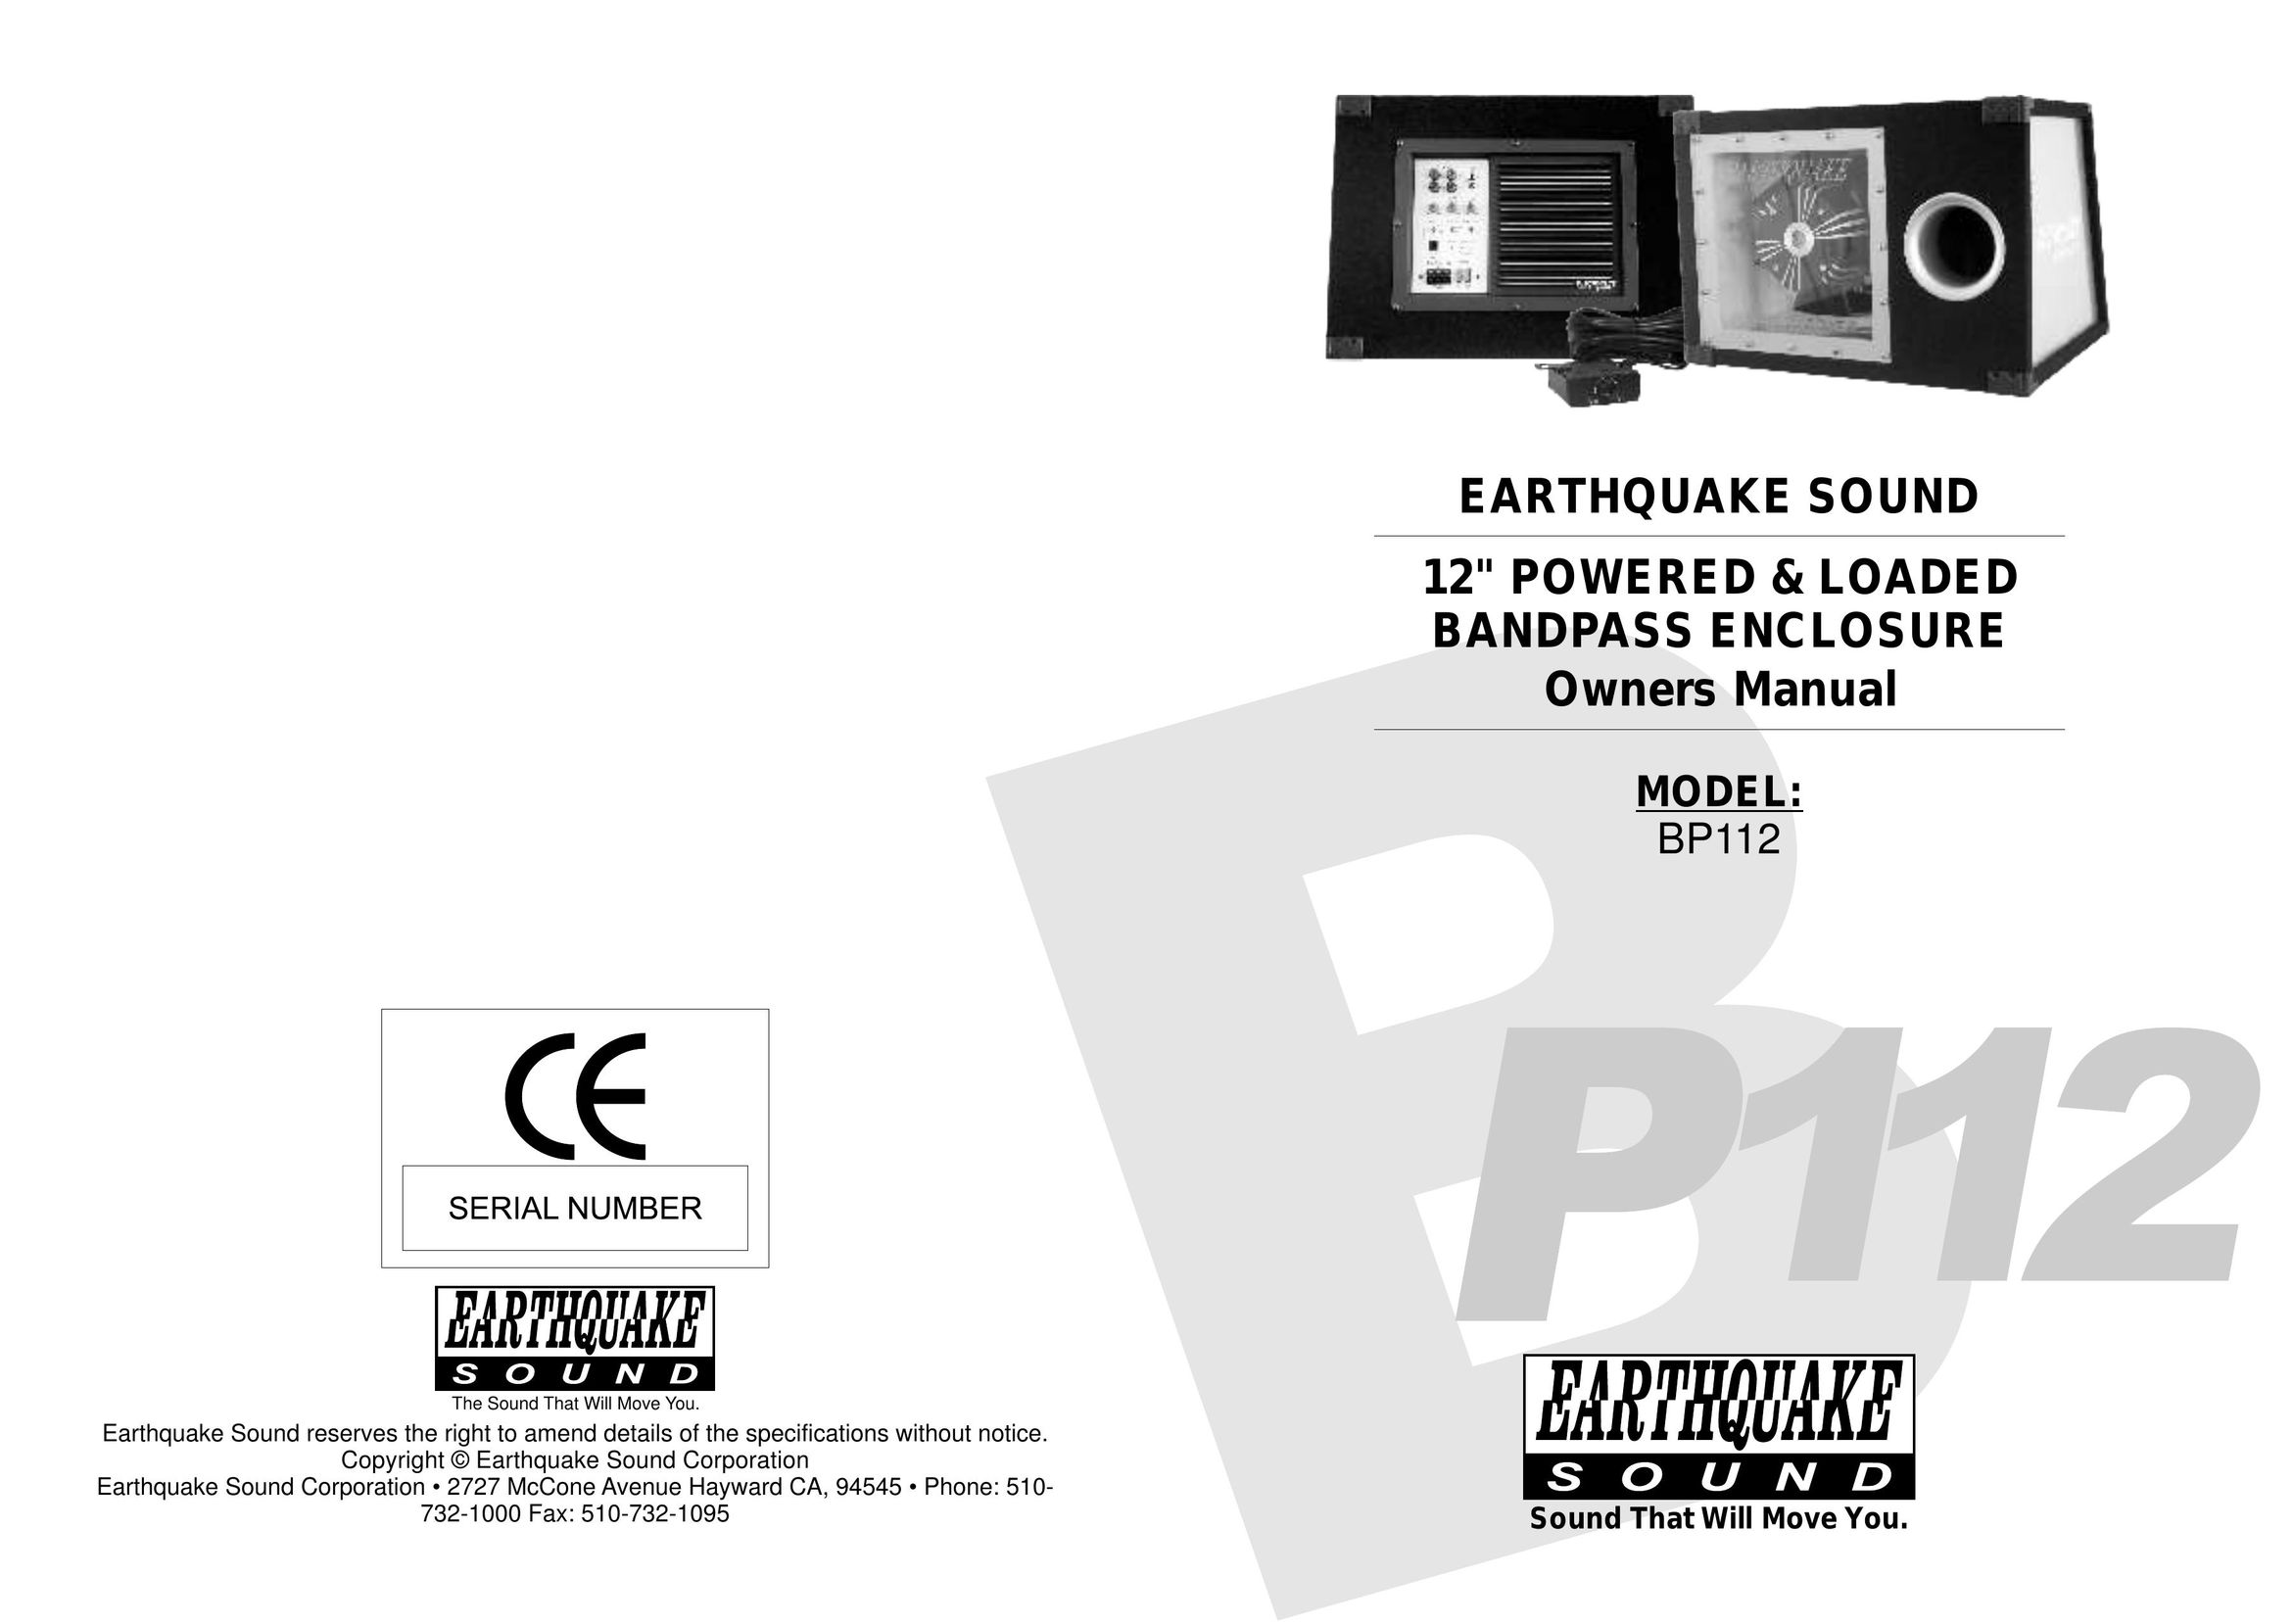 Earthquake Sound BP112 Home Theater System User Manual